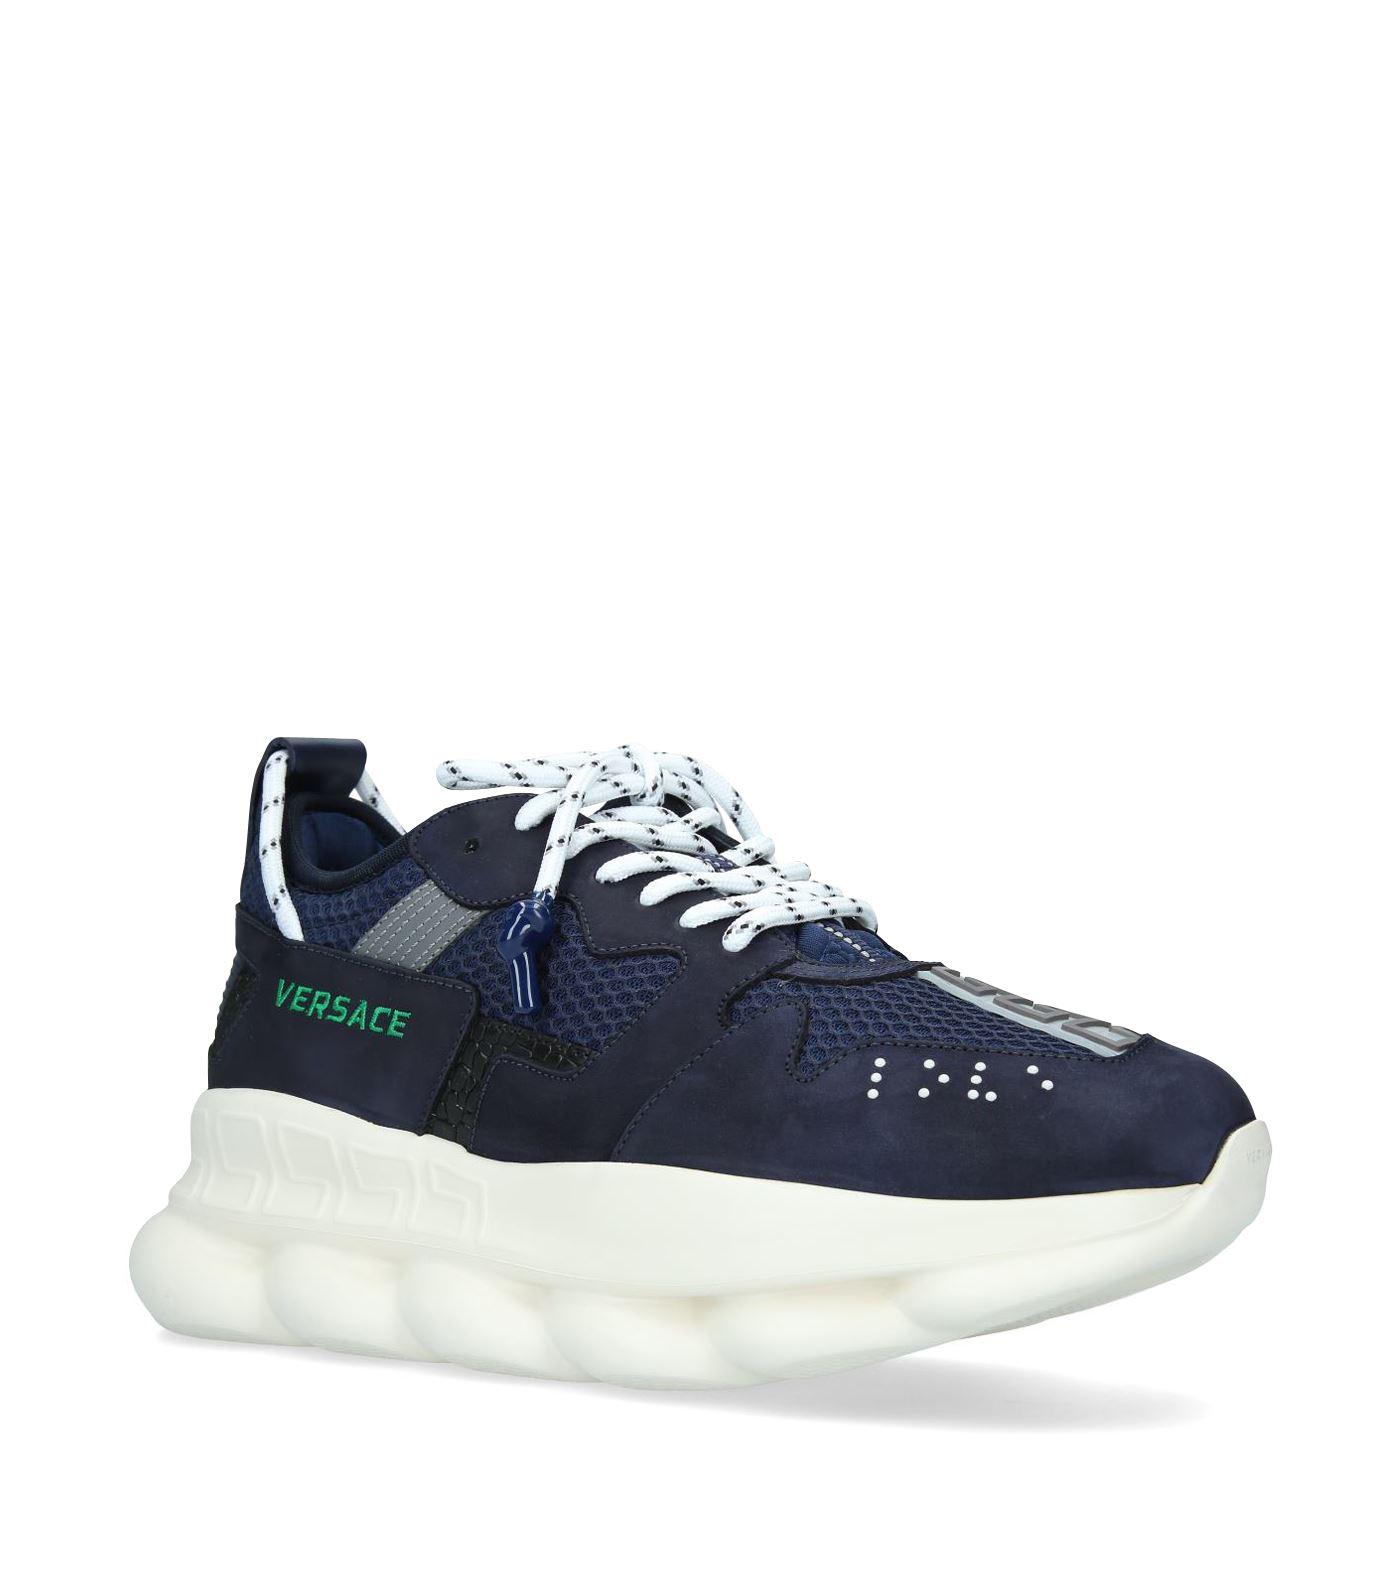 Versace Suede Chain React Sneakers in Navy (Blue) for Men - Lyst